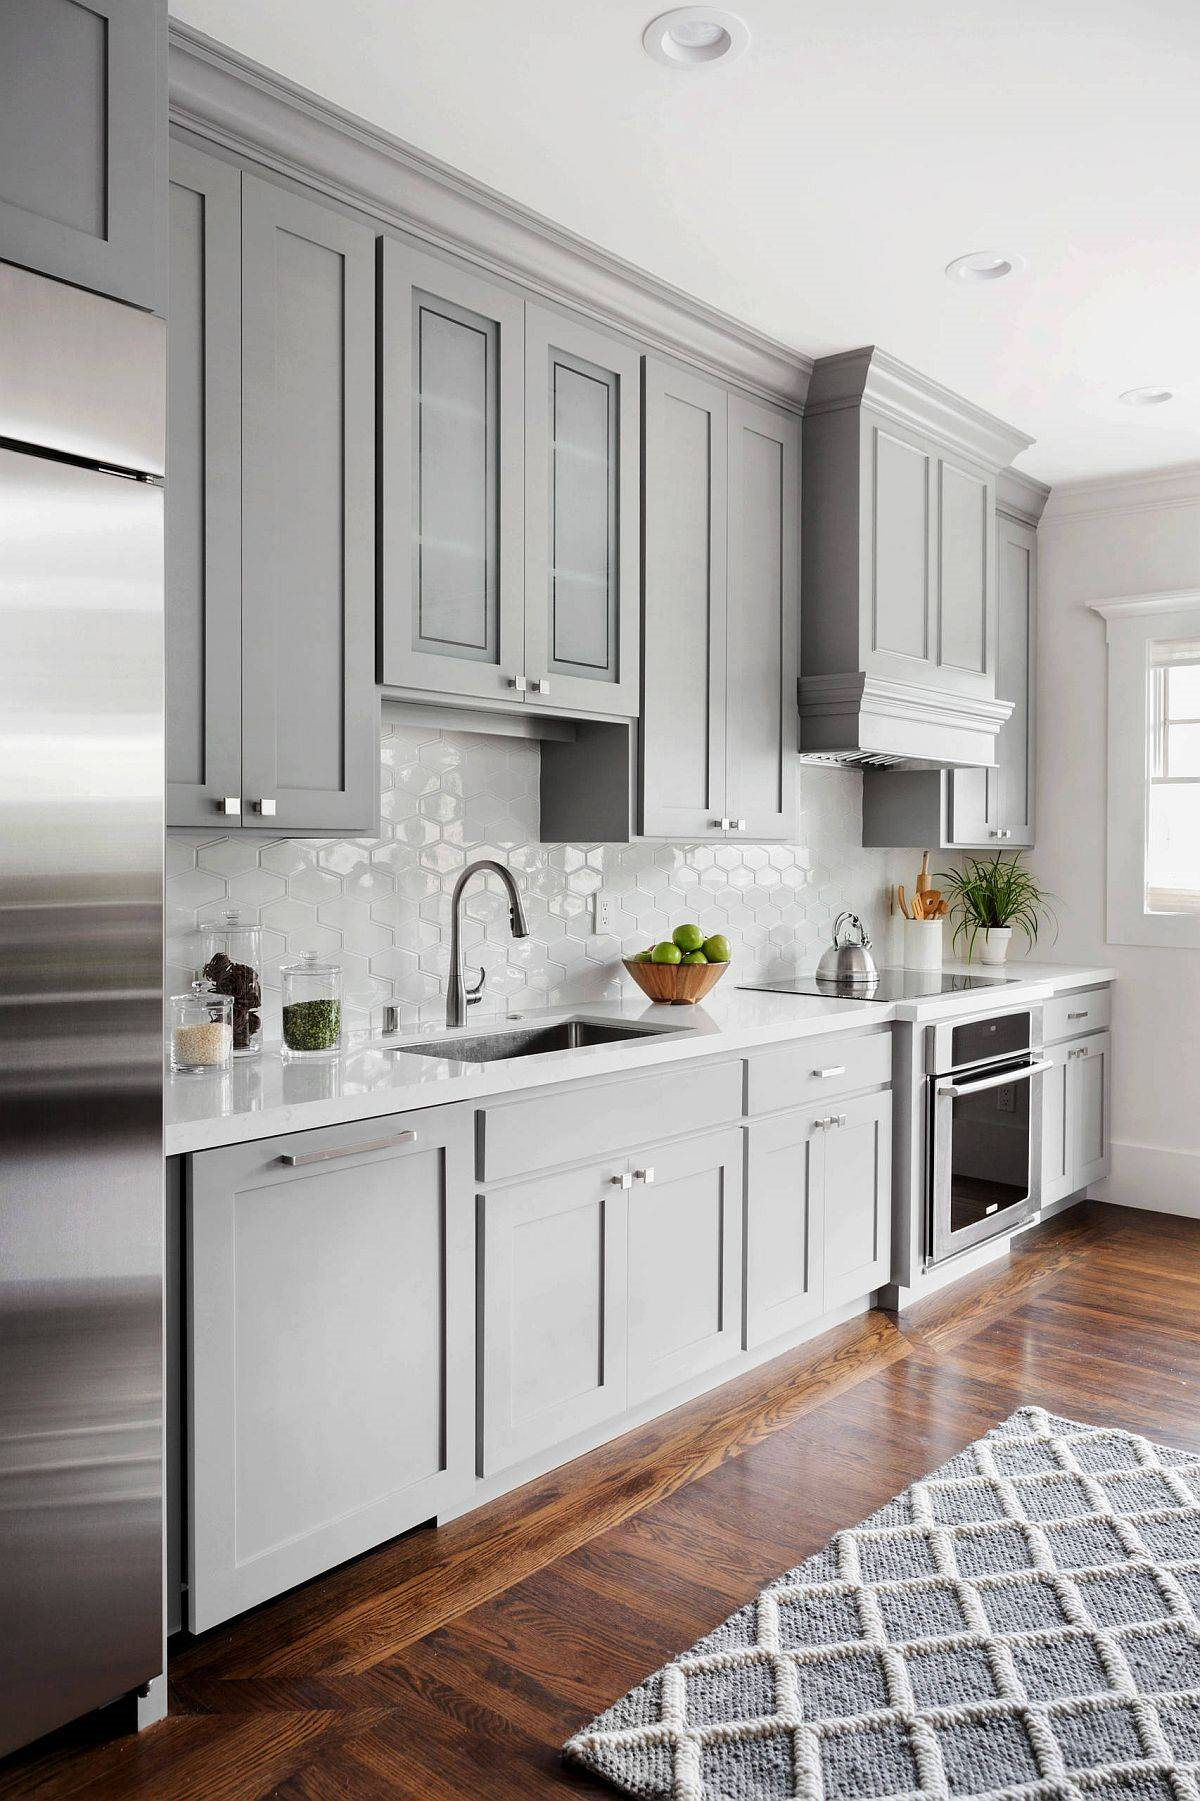 monochromatic-single-wall-kitchen-offers-ample-storage-while-seemingly-blending-into-the-backdrop-69426.jpg